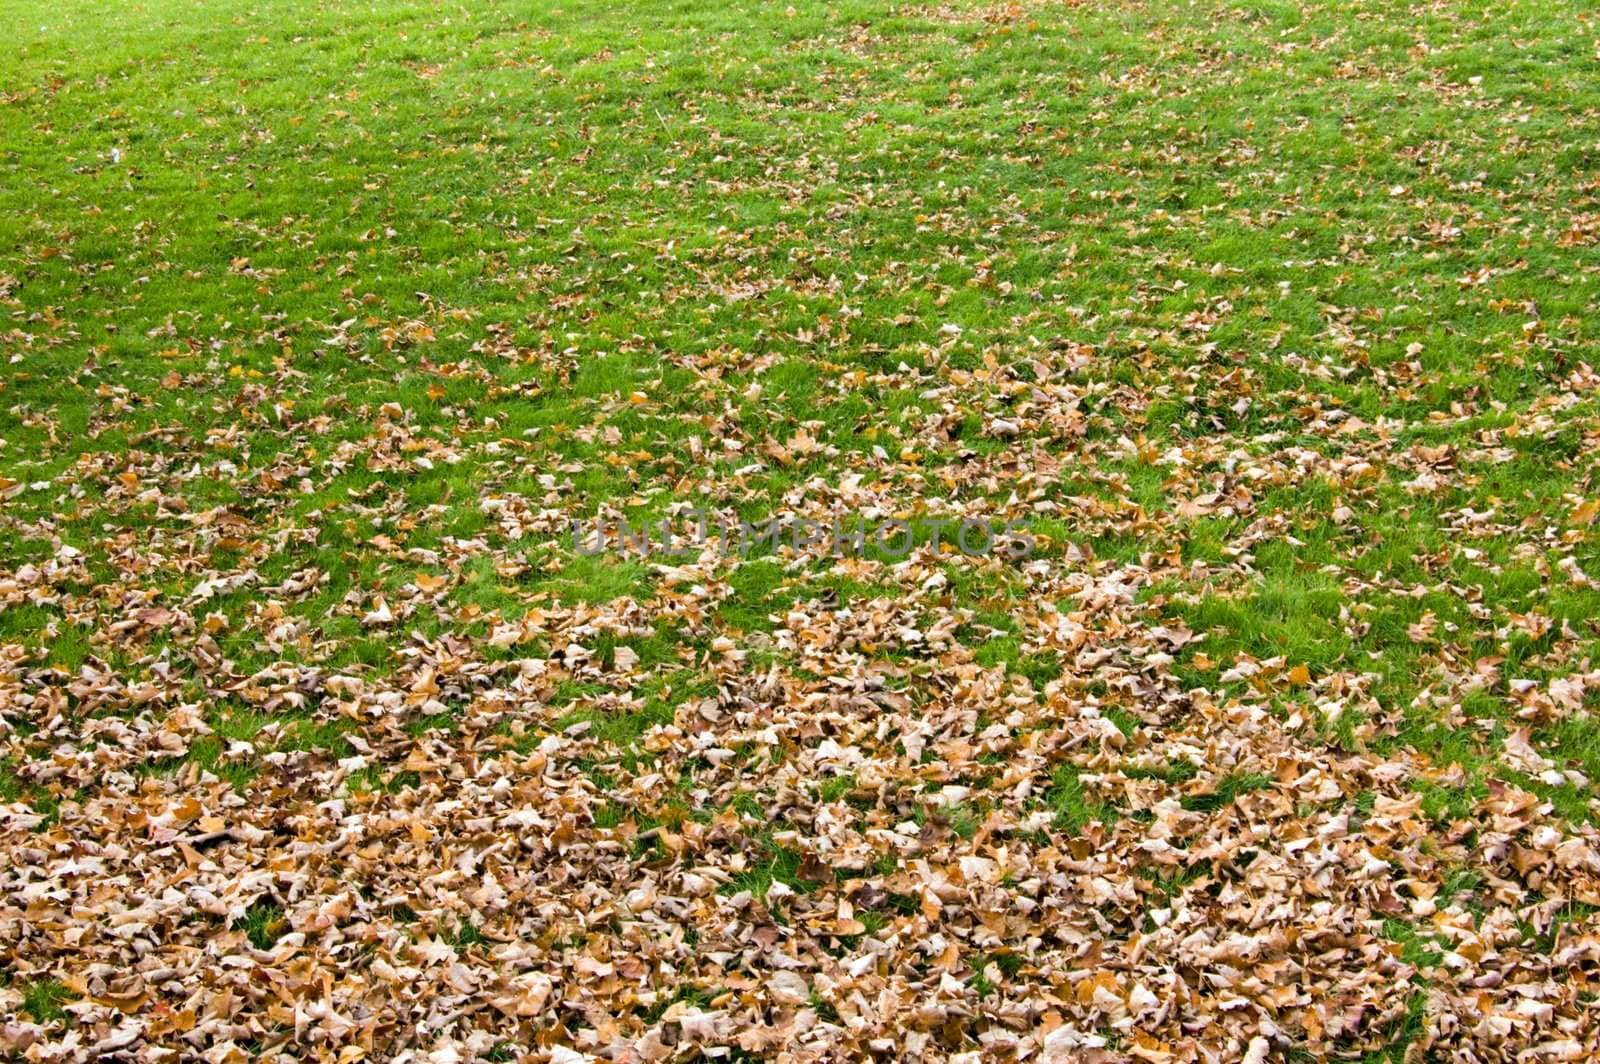 Yellow dry Leaves in the green grass